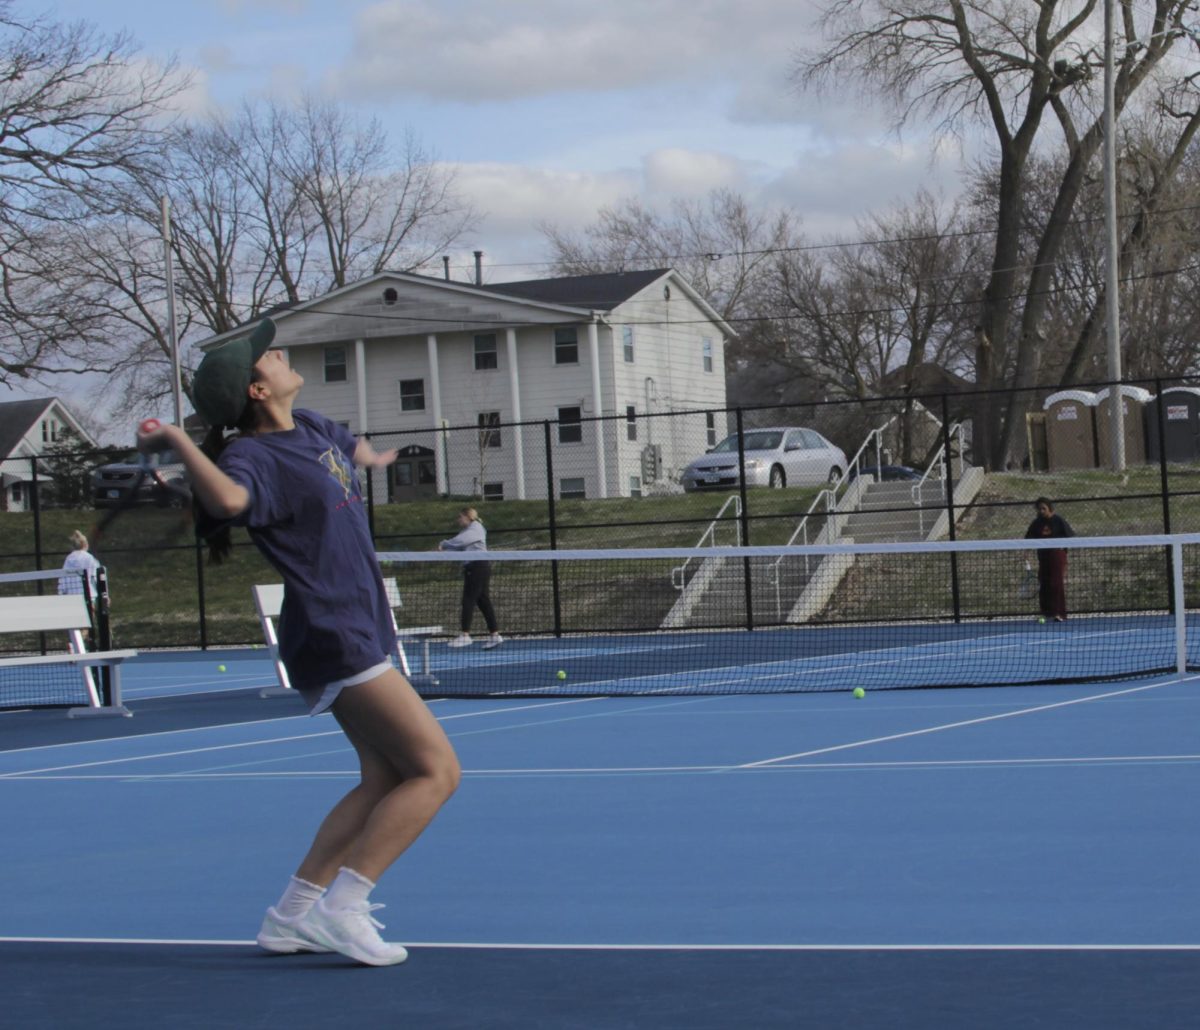 Augustana College women’s tennis team practices on the new Lincoln Park Tennis Court near Swanson, equipped with benches.